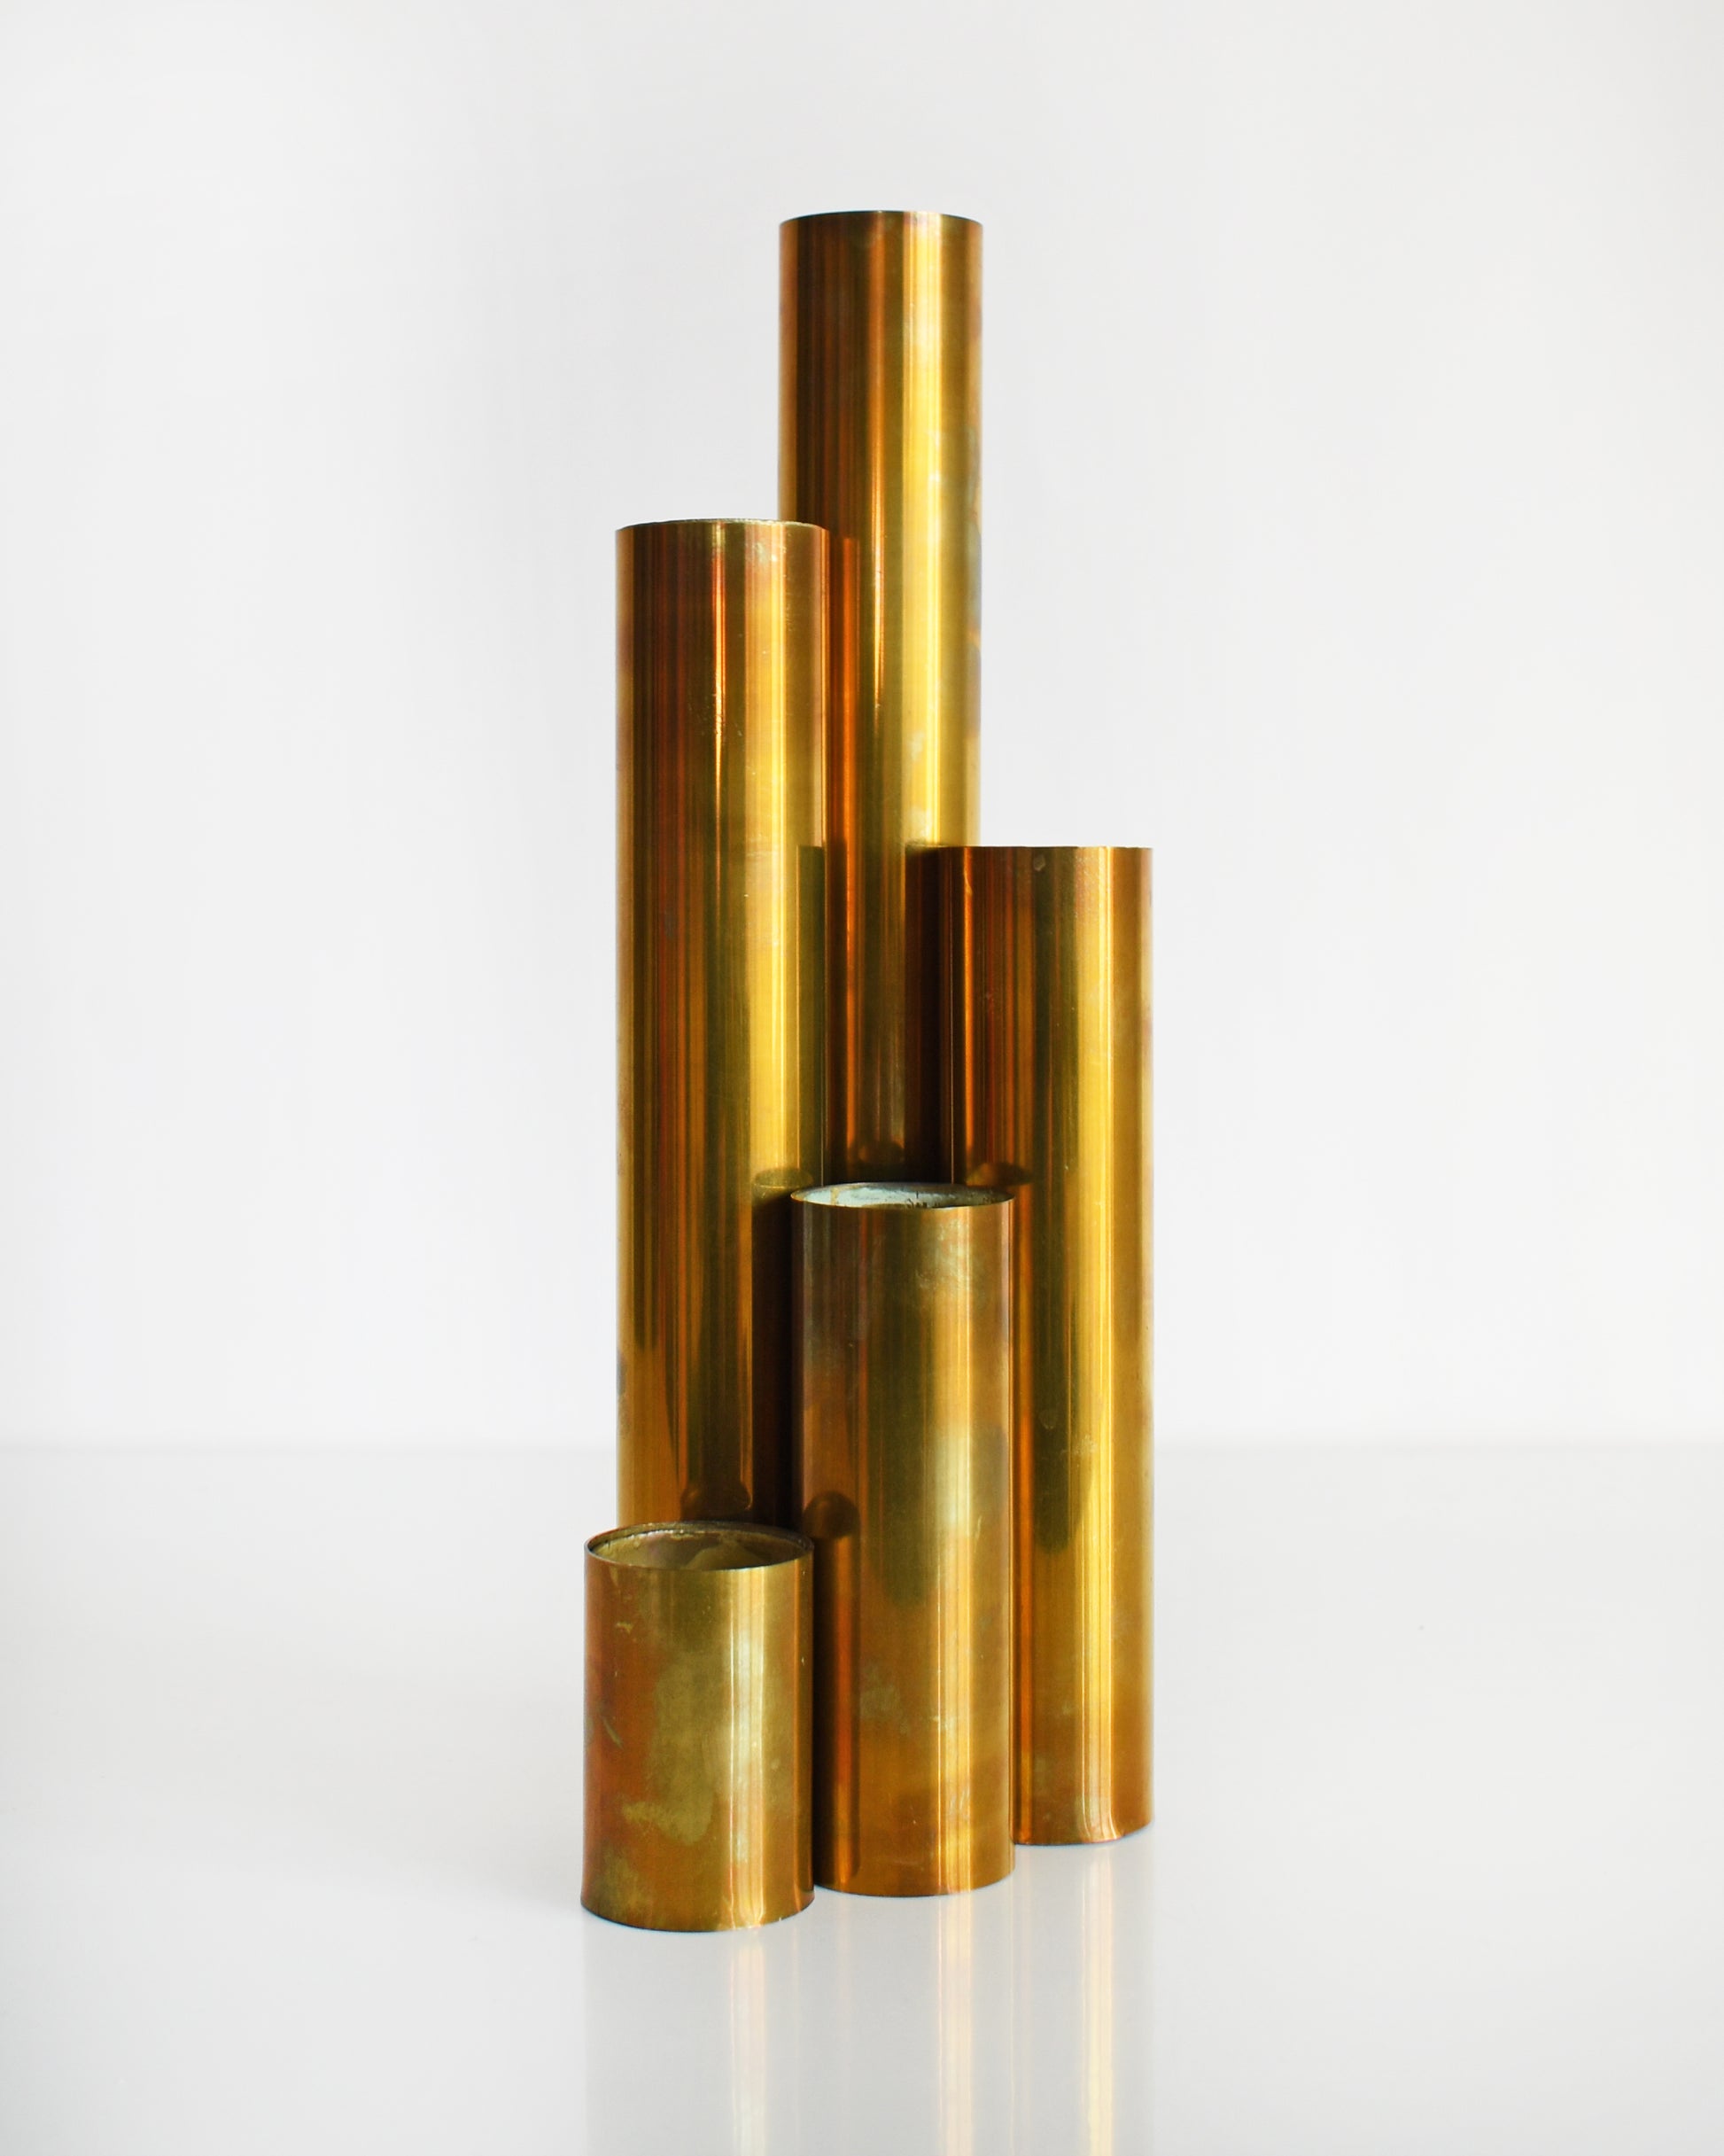 Five mid century brass cylindrical candle holders in different sizes